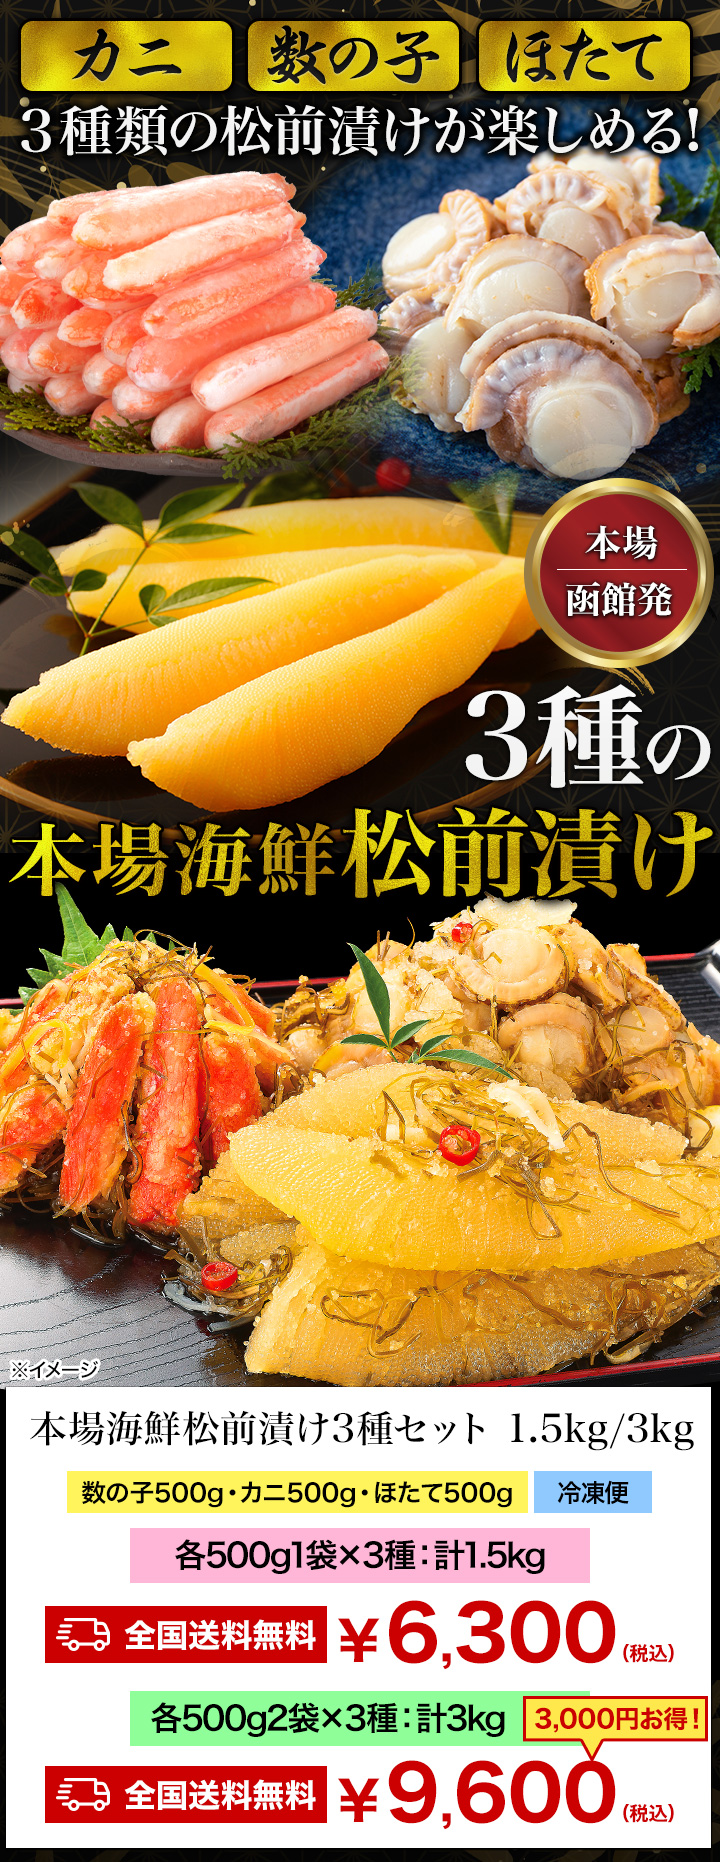 [. discount coupon distribution middle ] genuine seafood pine front ..3 kind set 3kg pine front .. herring roe number. .. length scallop snow crab . cloth Hakodate seafood free shipping 